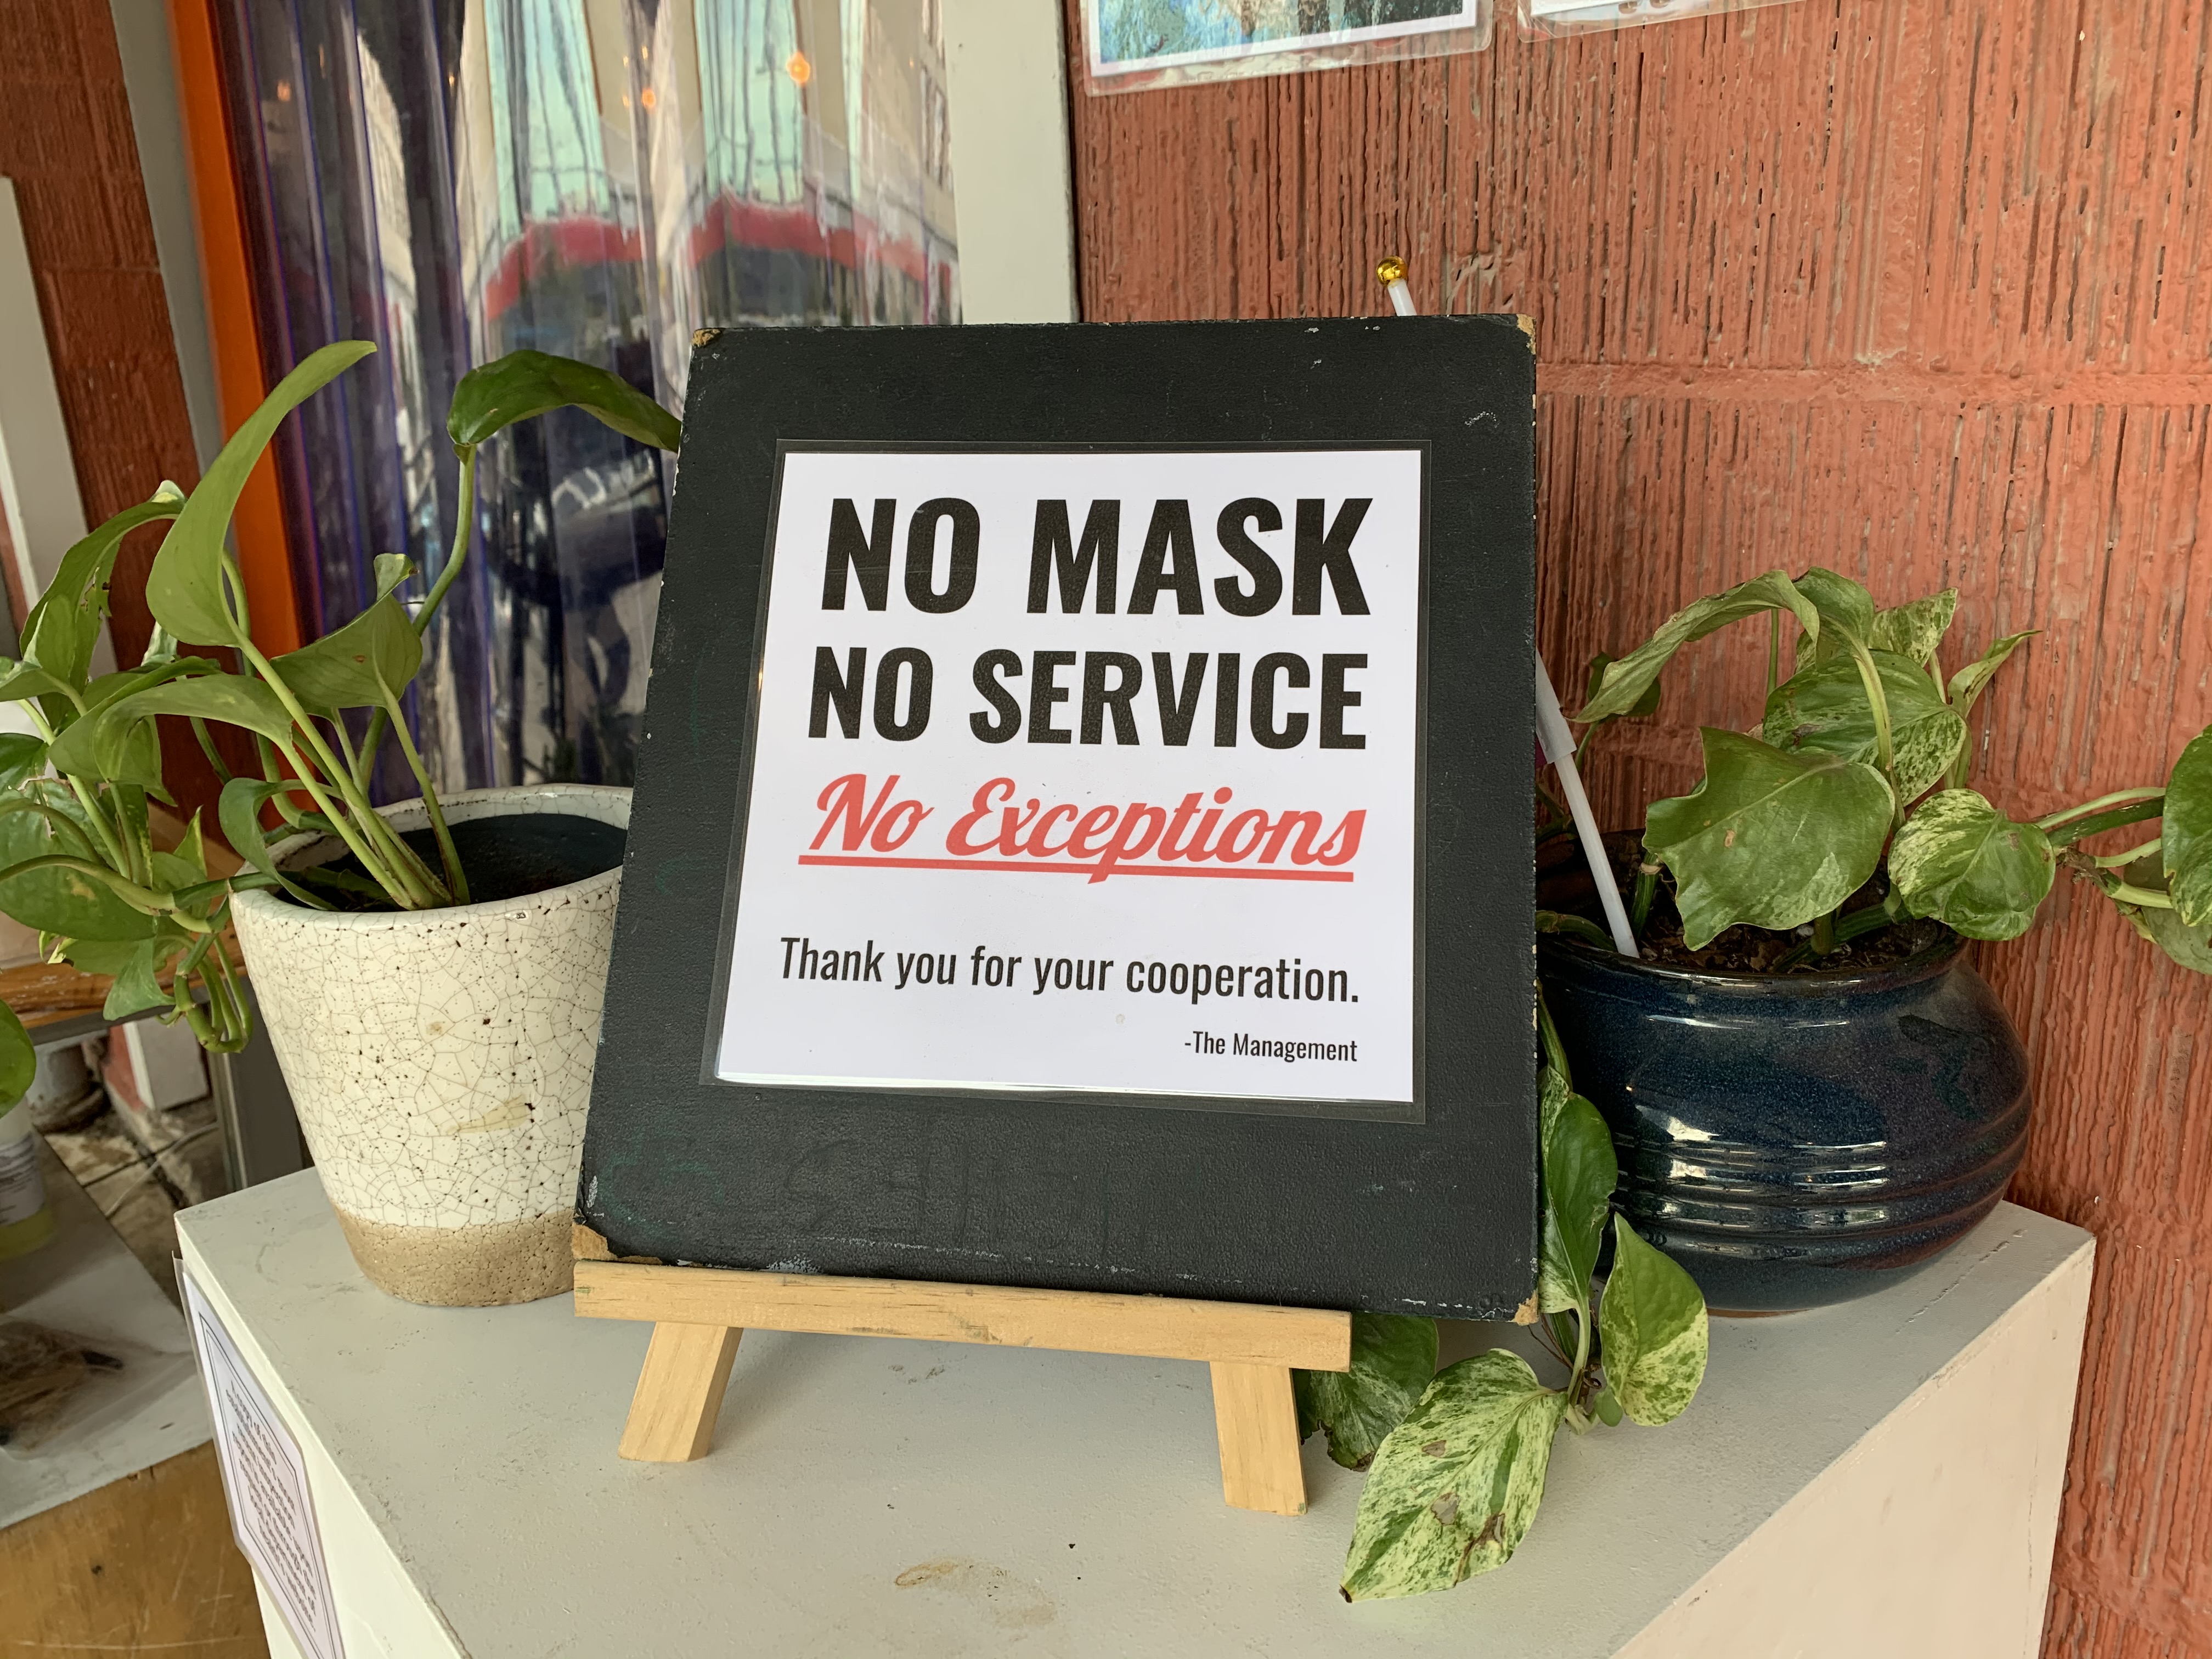 The mask signage at Brew &amp; Brew